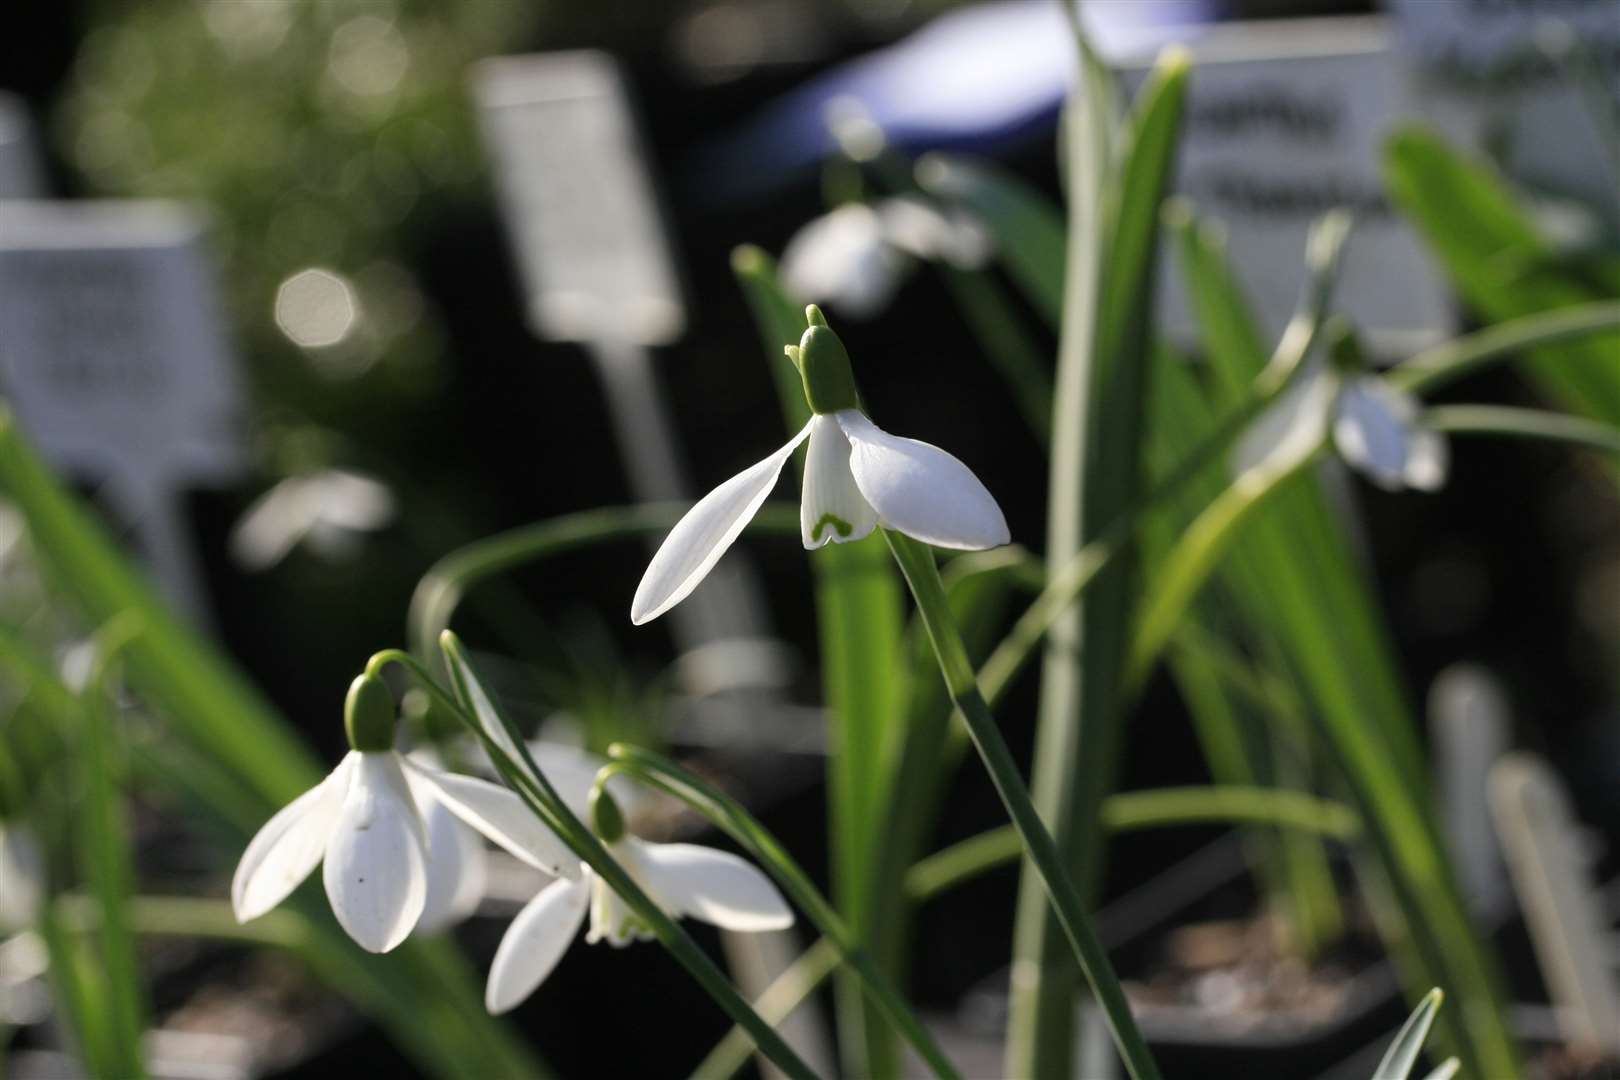 Snowdrops are the most stunning of late-winter flowers